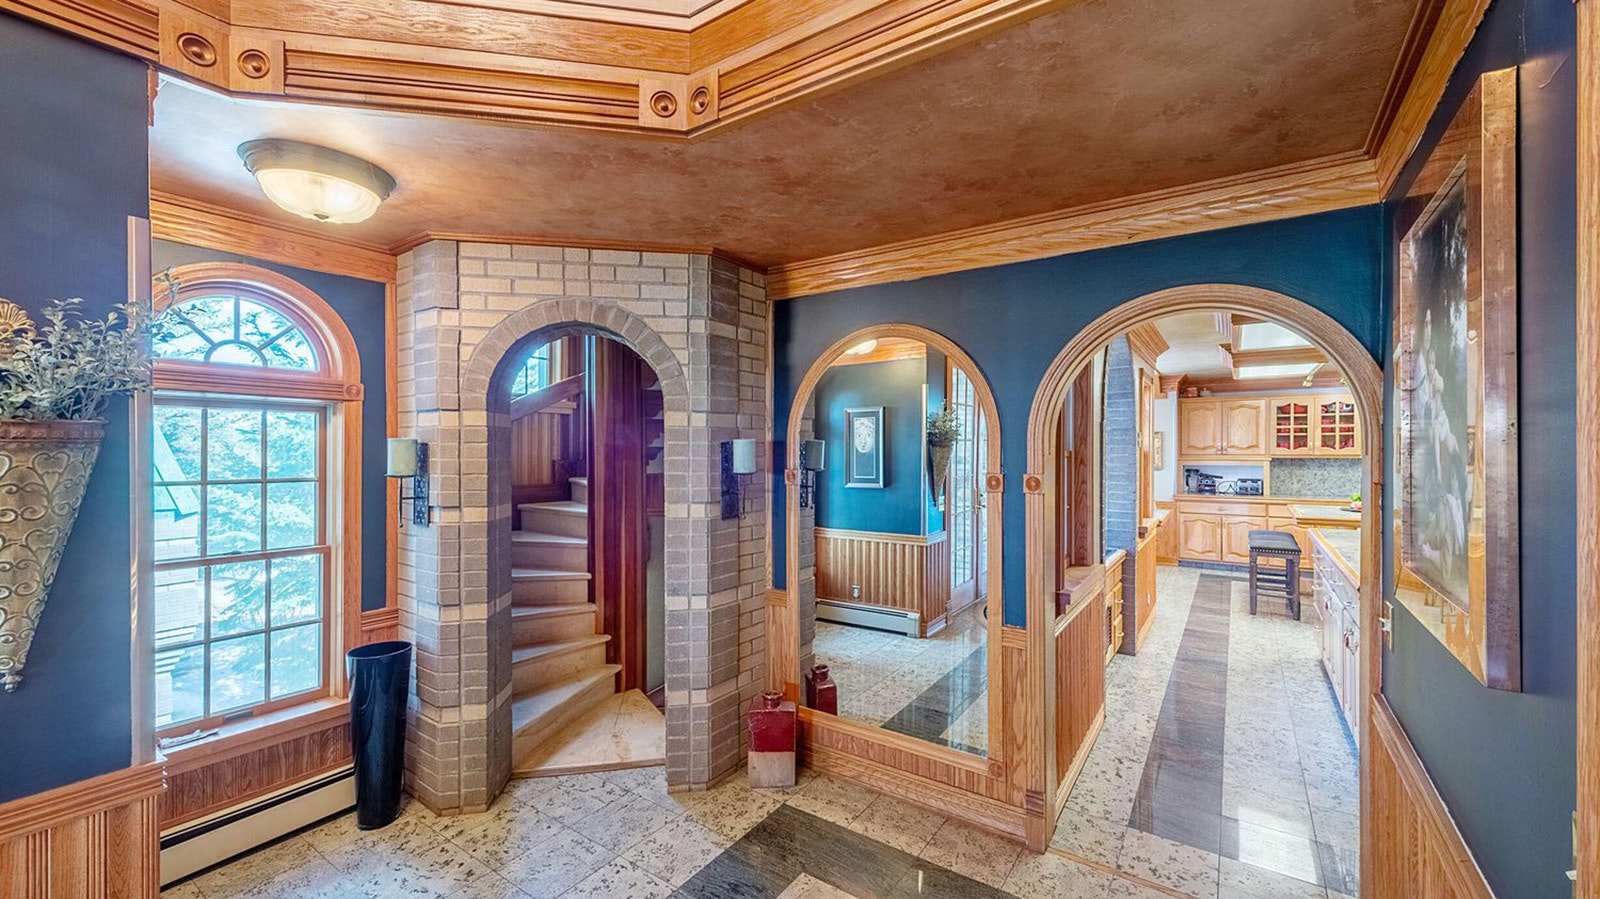 There's nothing ordinary about the Bedford Castle, with unique features throughout the 9,470-square-foot fairy tale castle.